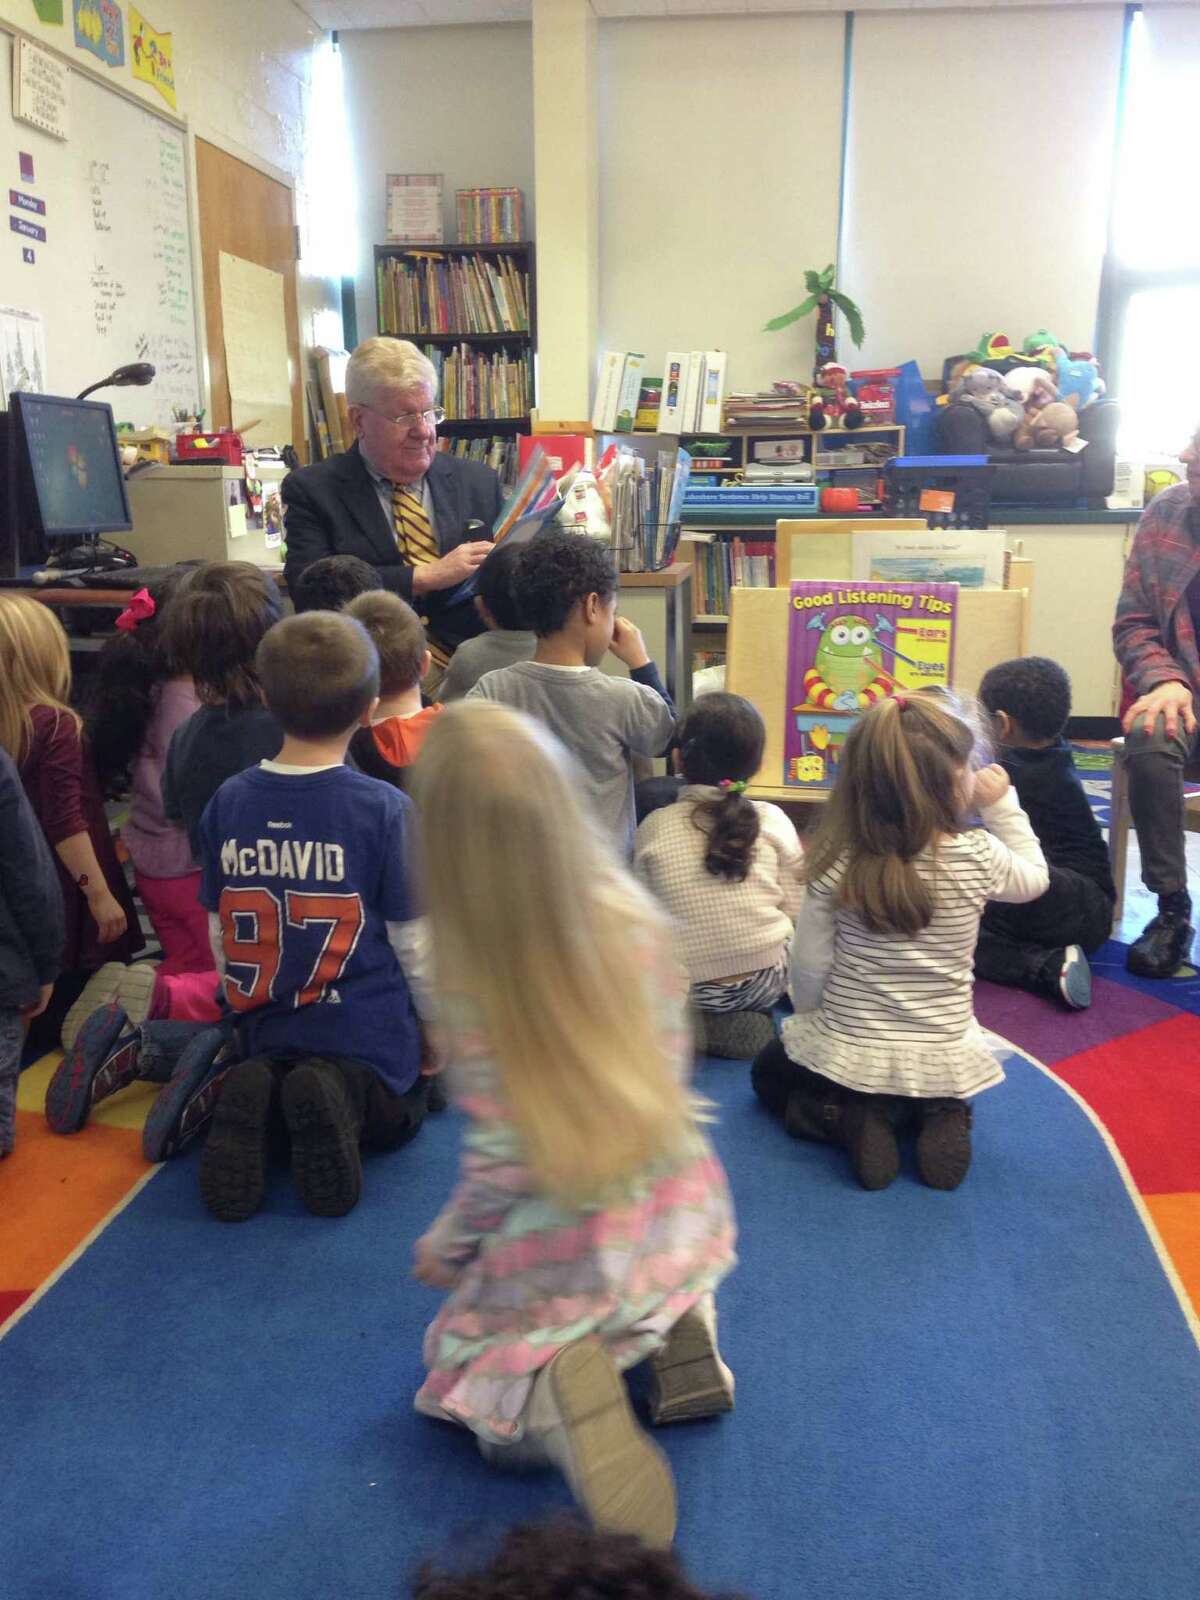 Interim Superintendent James Connelly starts his first day on the job reading to students in Brie O'Brien's class at the Apples preschool program.